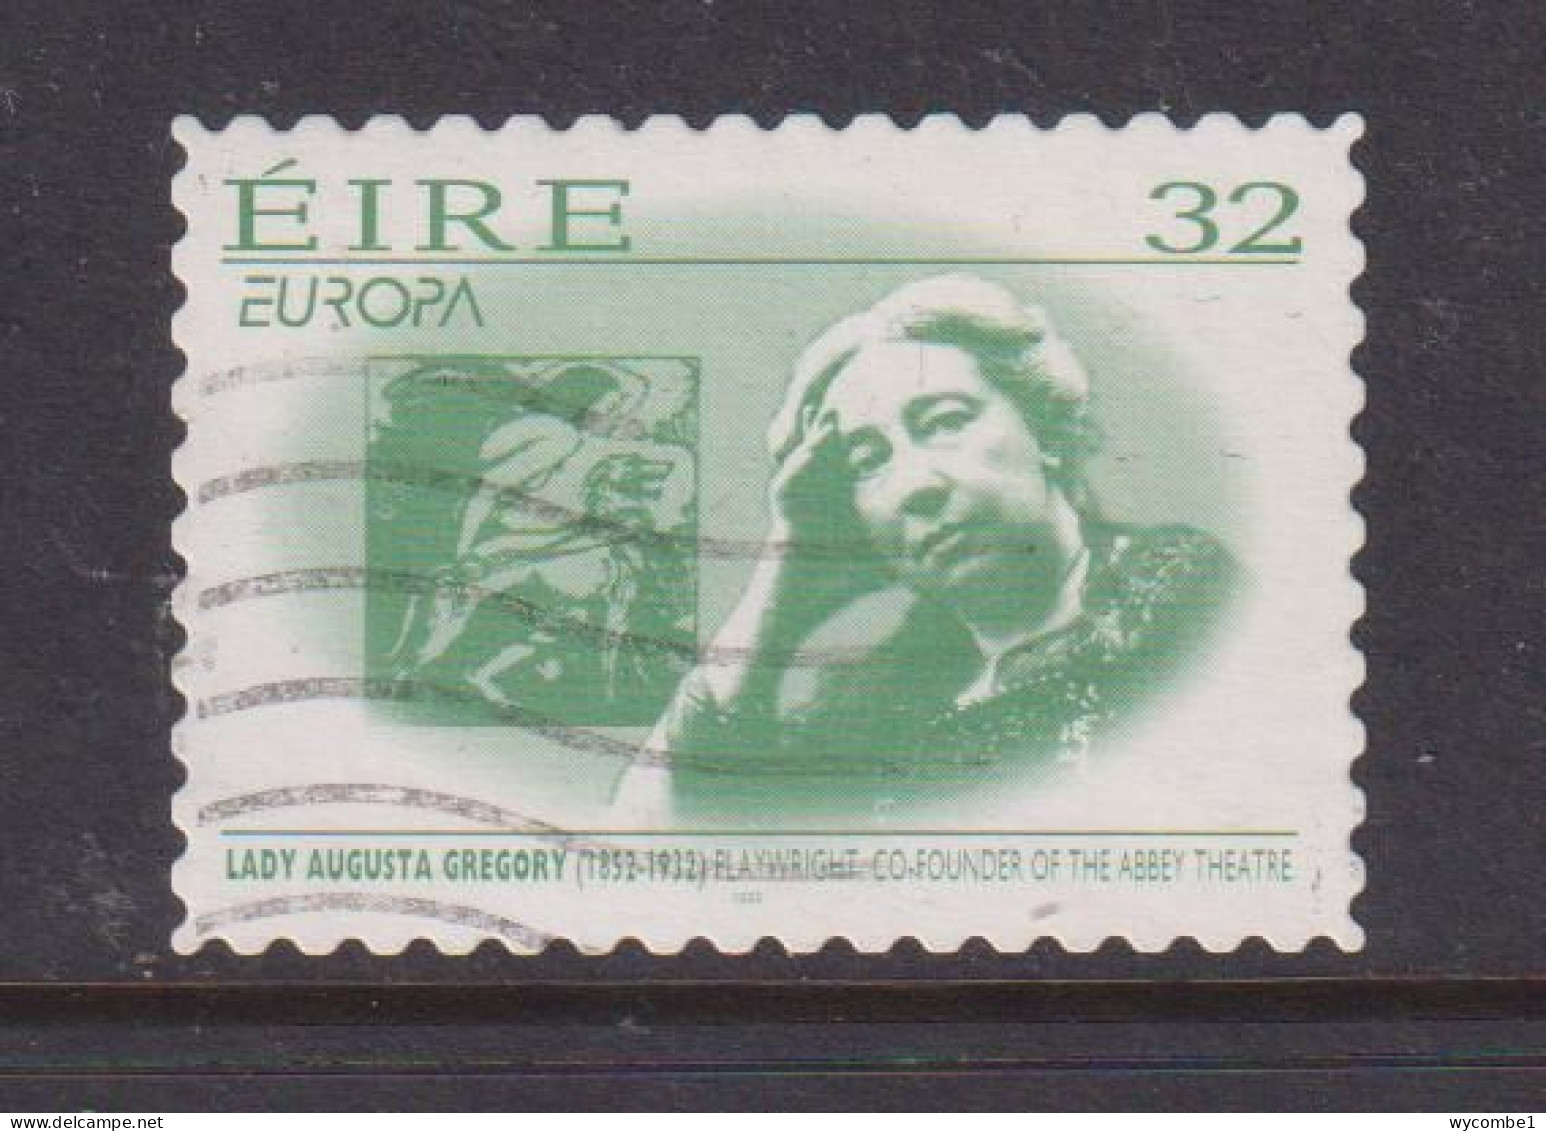 IRELAND - 1996  Europa  32p  Used As Scan - Oblitérés